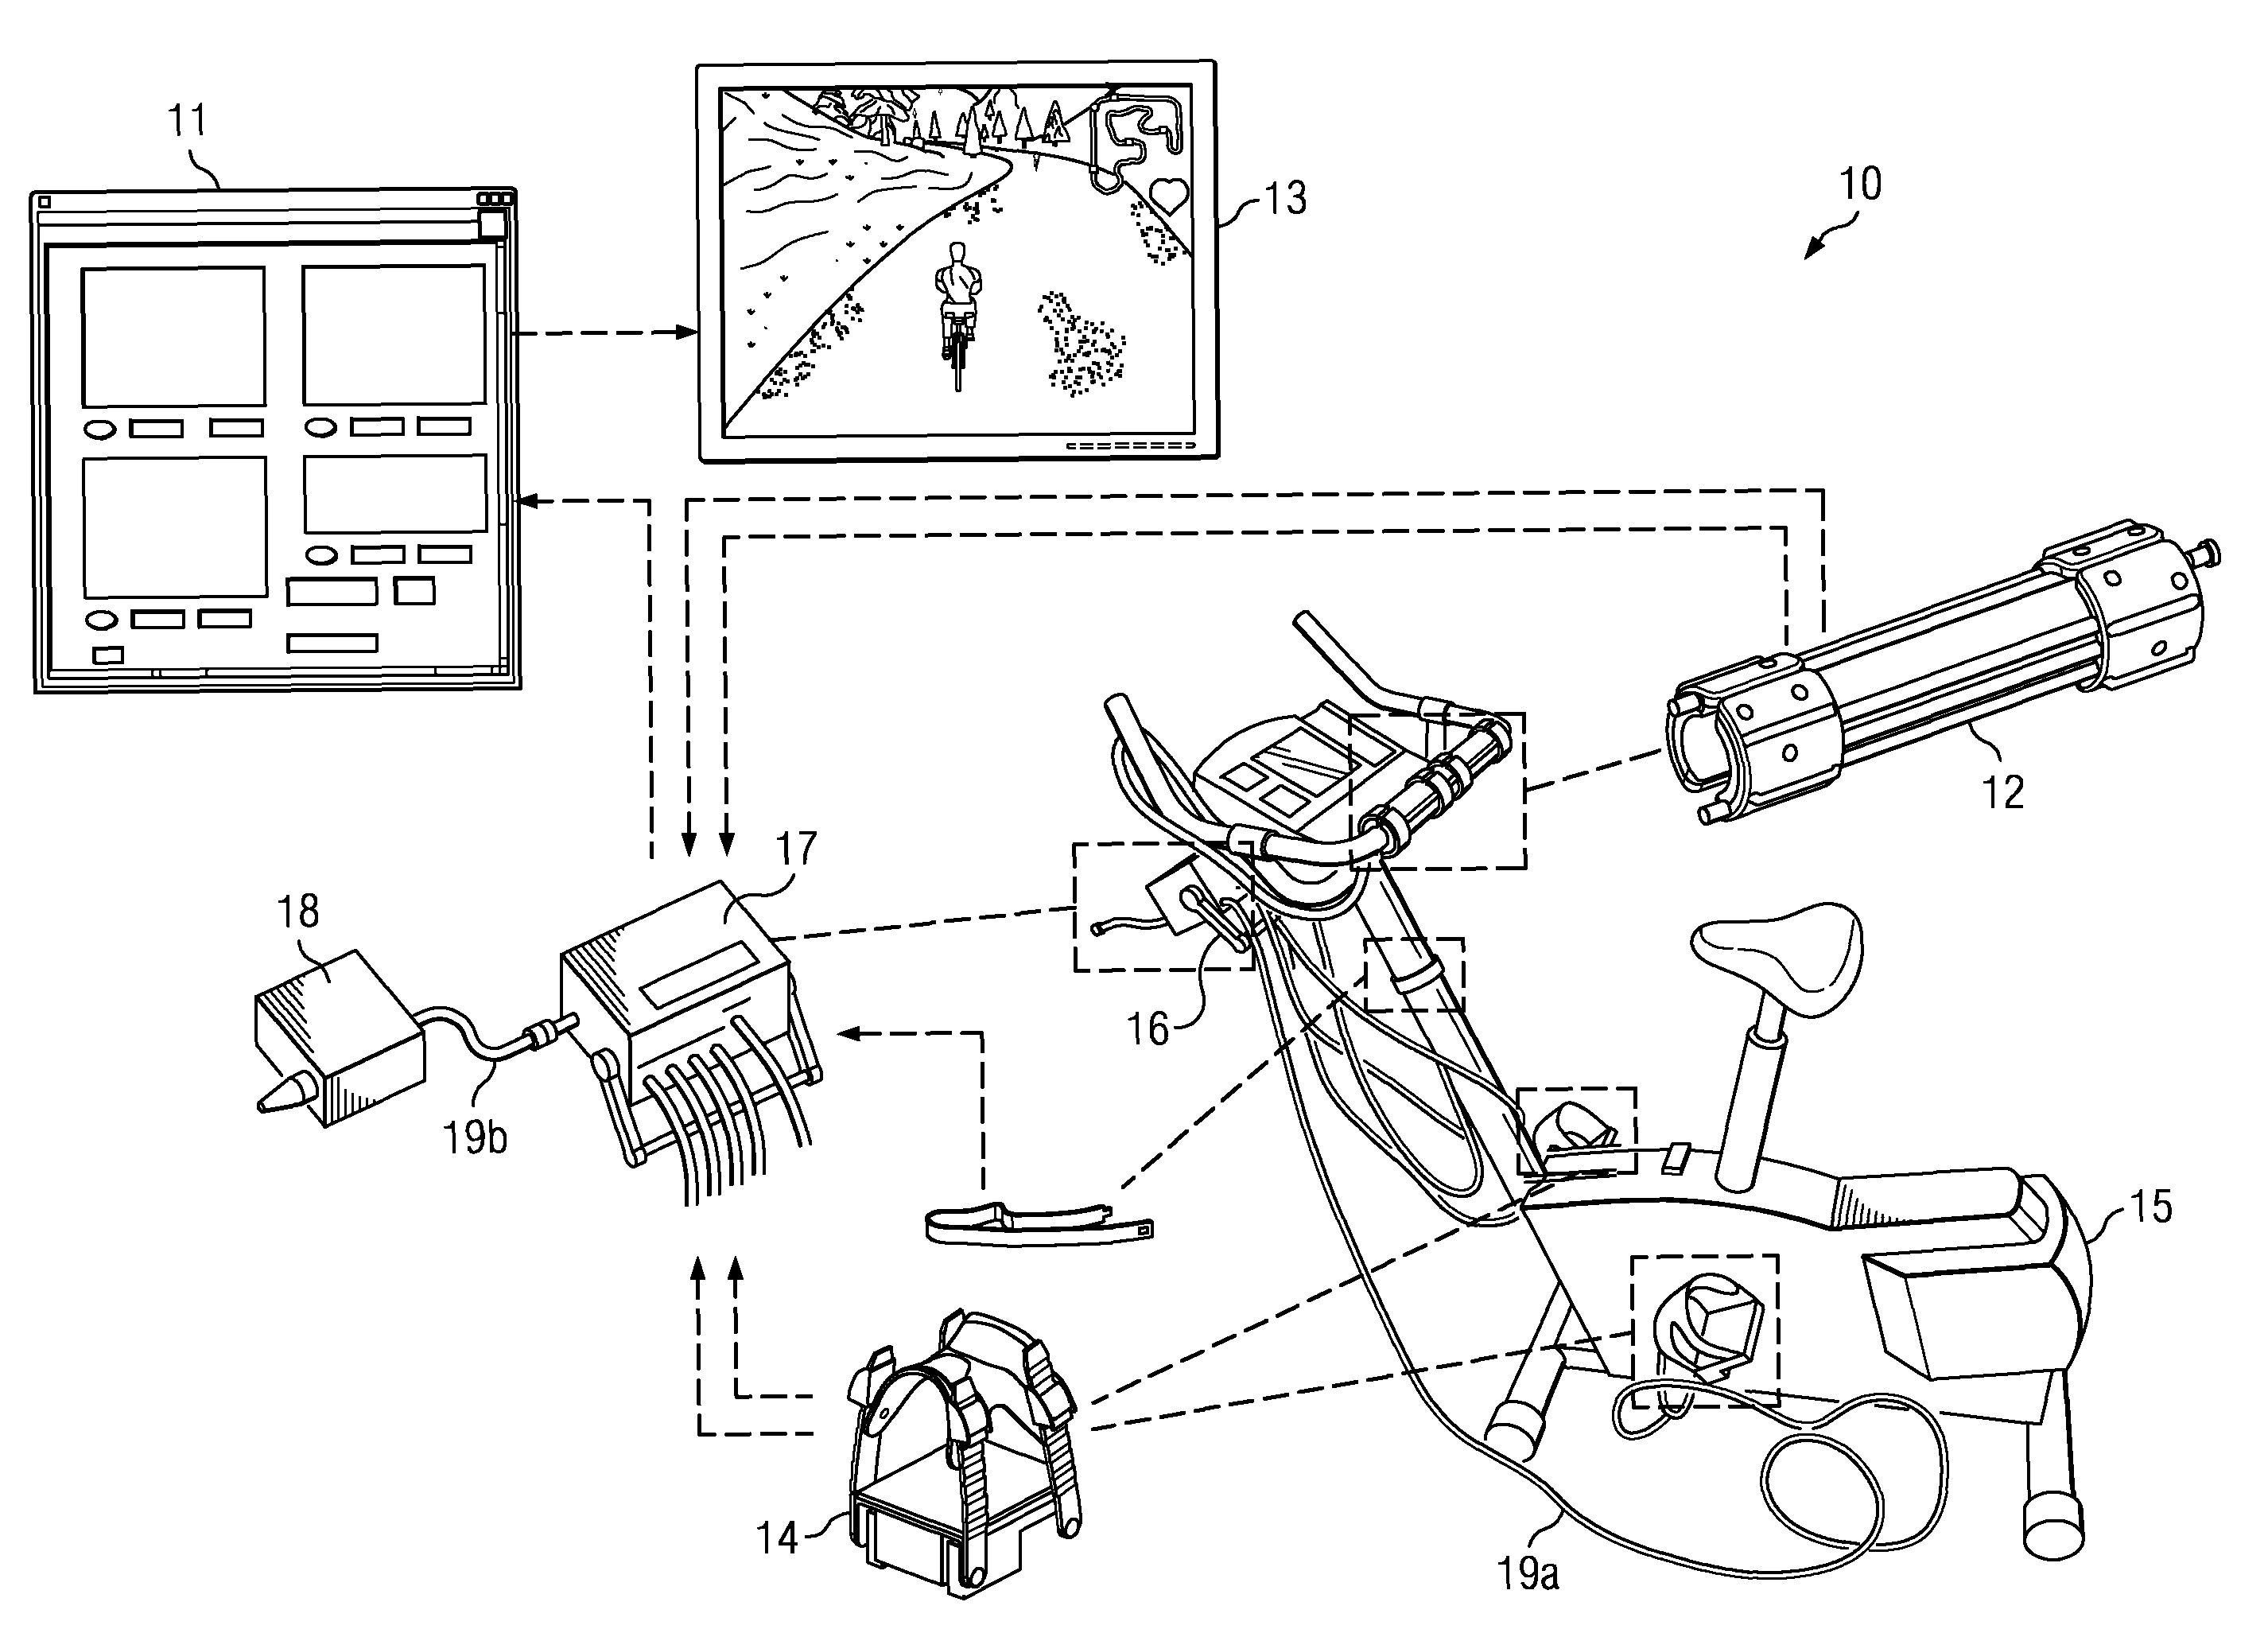 Instrumented handle and pedal systems for use in rehabilitation, exercise and training equipment